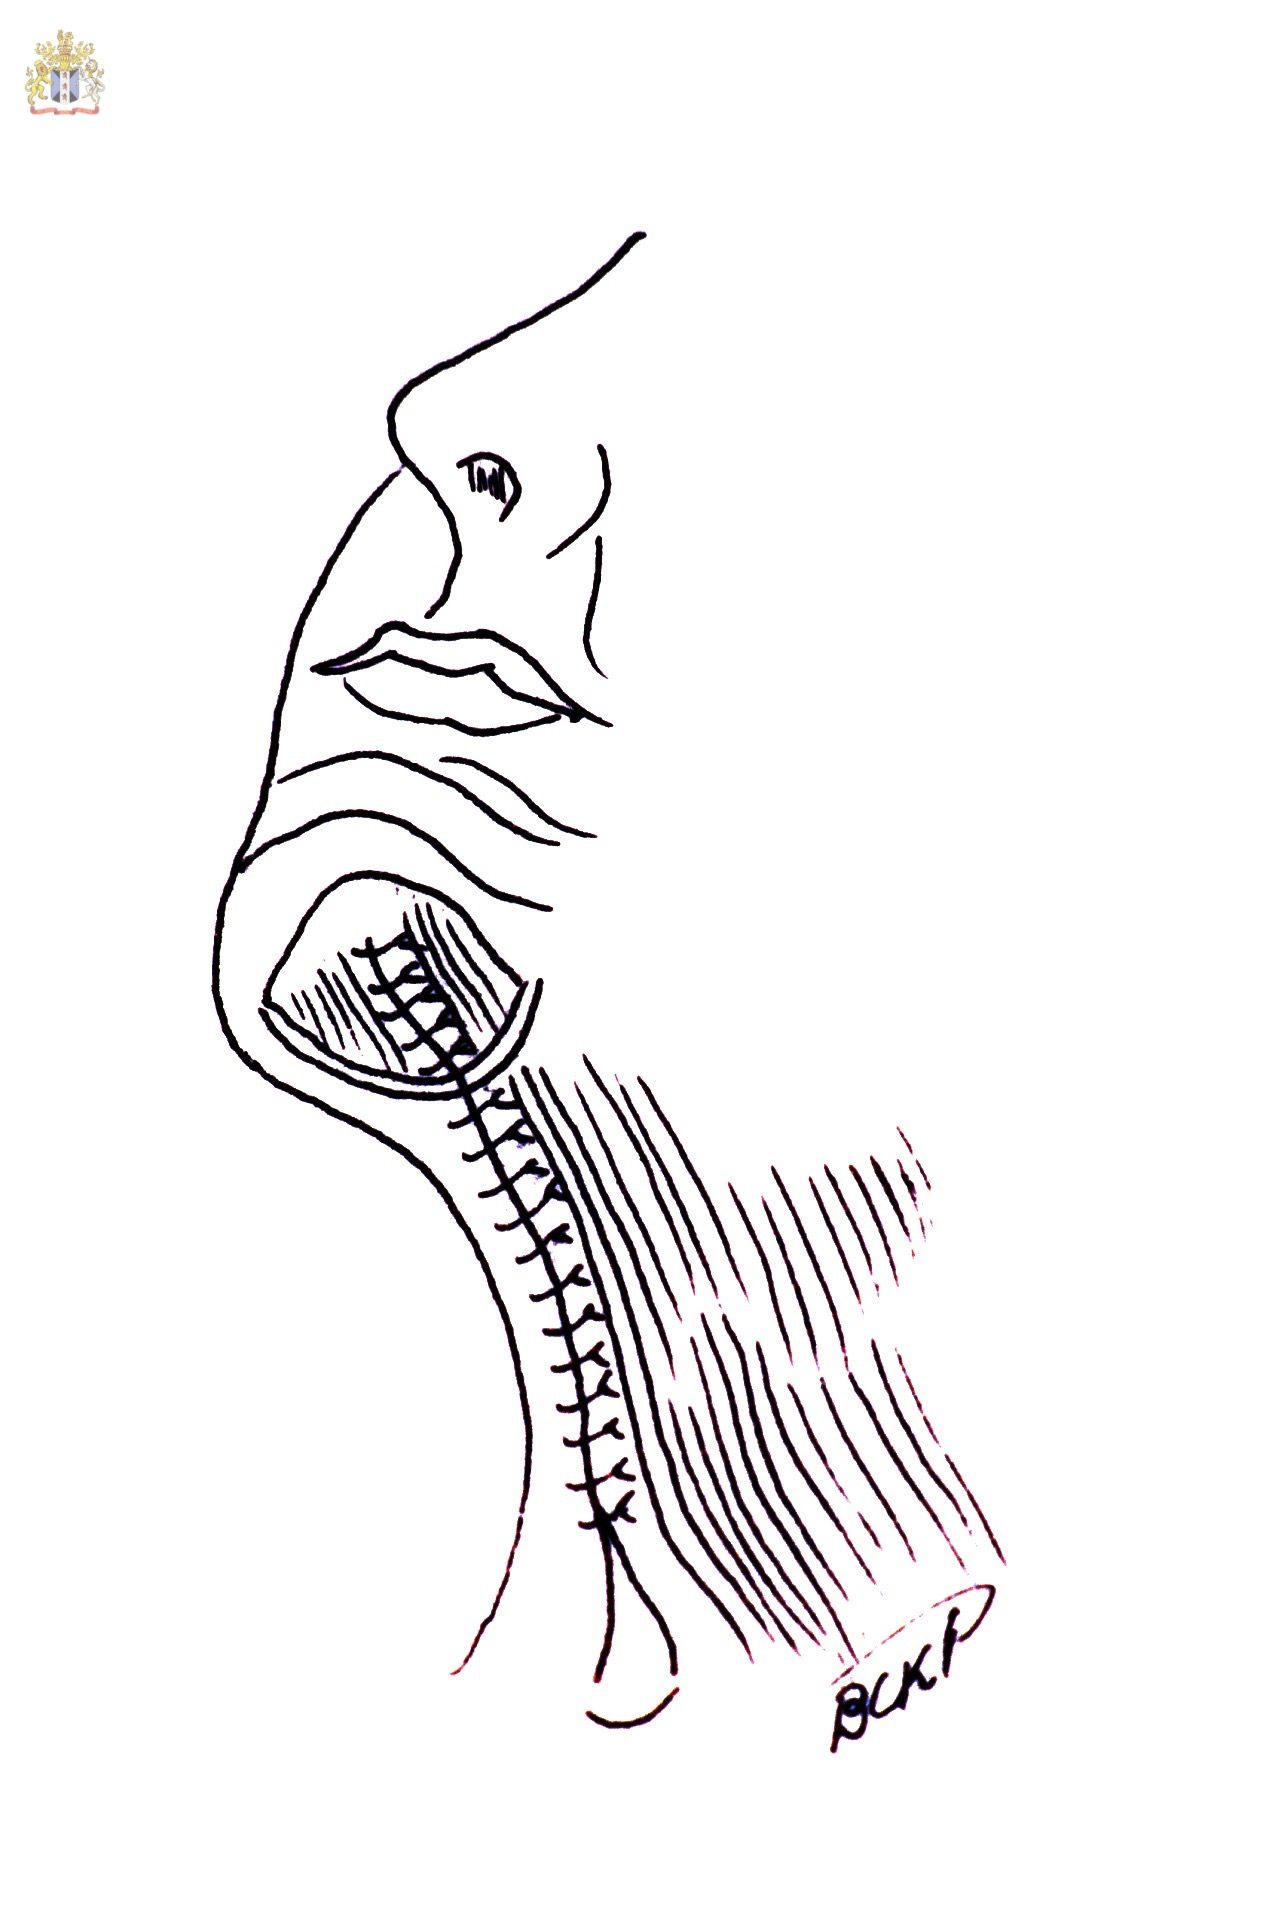 The Corset Platysmaplasty where the medial separated platysmal bands are sutured with two or three layers of sutures from the mentum to the supraclavicular zone. Some surgeons now feel that this may bring the platysma down and result in recurrence of bands in the neck and that a better way to manage the platysma is to tighten and lift it laterally and mostly superiorly with or without platysma myotomies. 